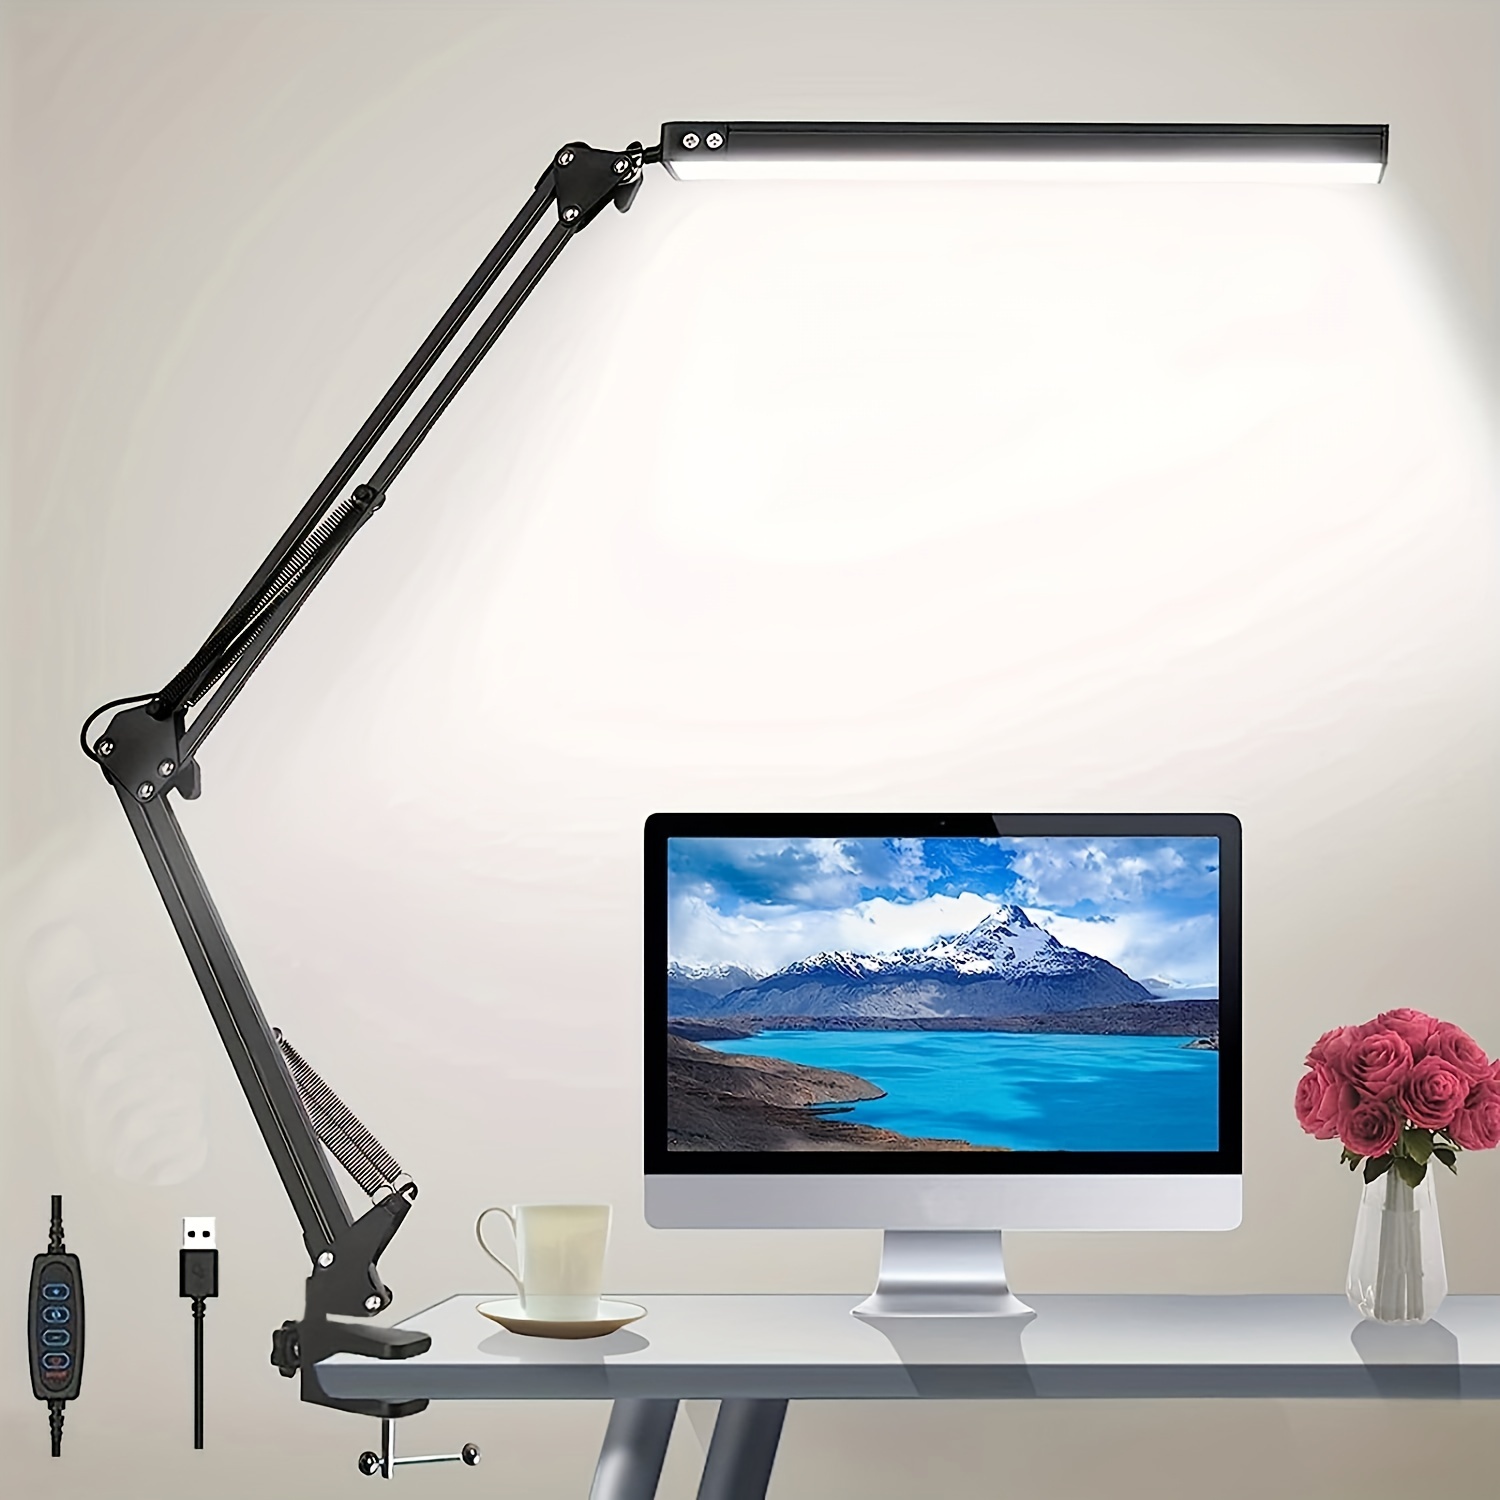 1pc led desk lamp with 3 lighting modes eye caring metal swing arm desk lamp with clamp 10 brightness dimmable clamp desk light with memory function table desk lamps for dorms studios reading